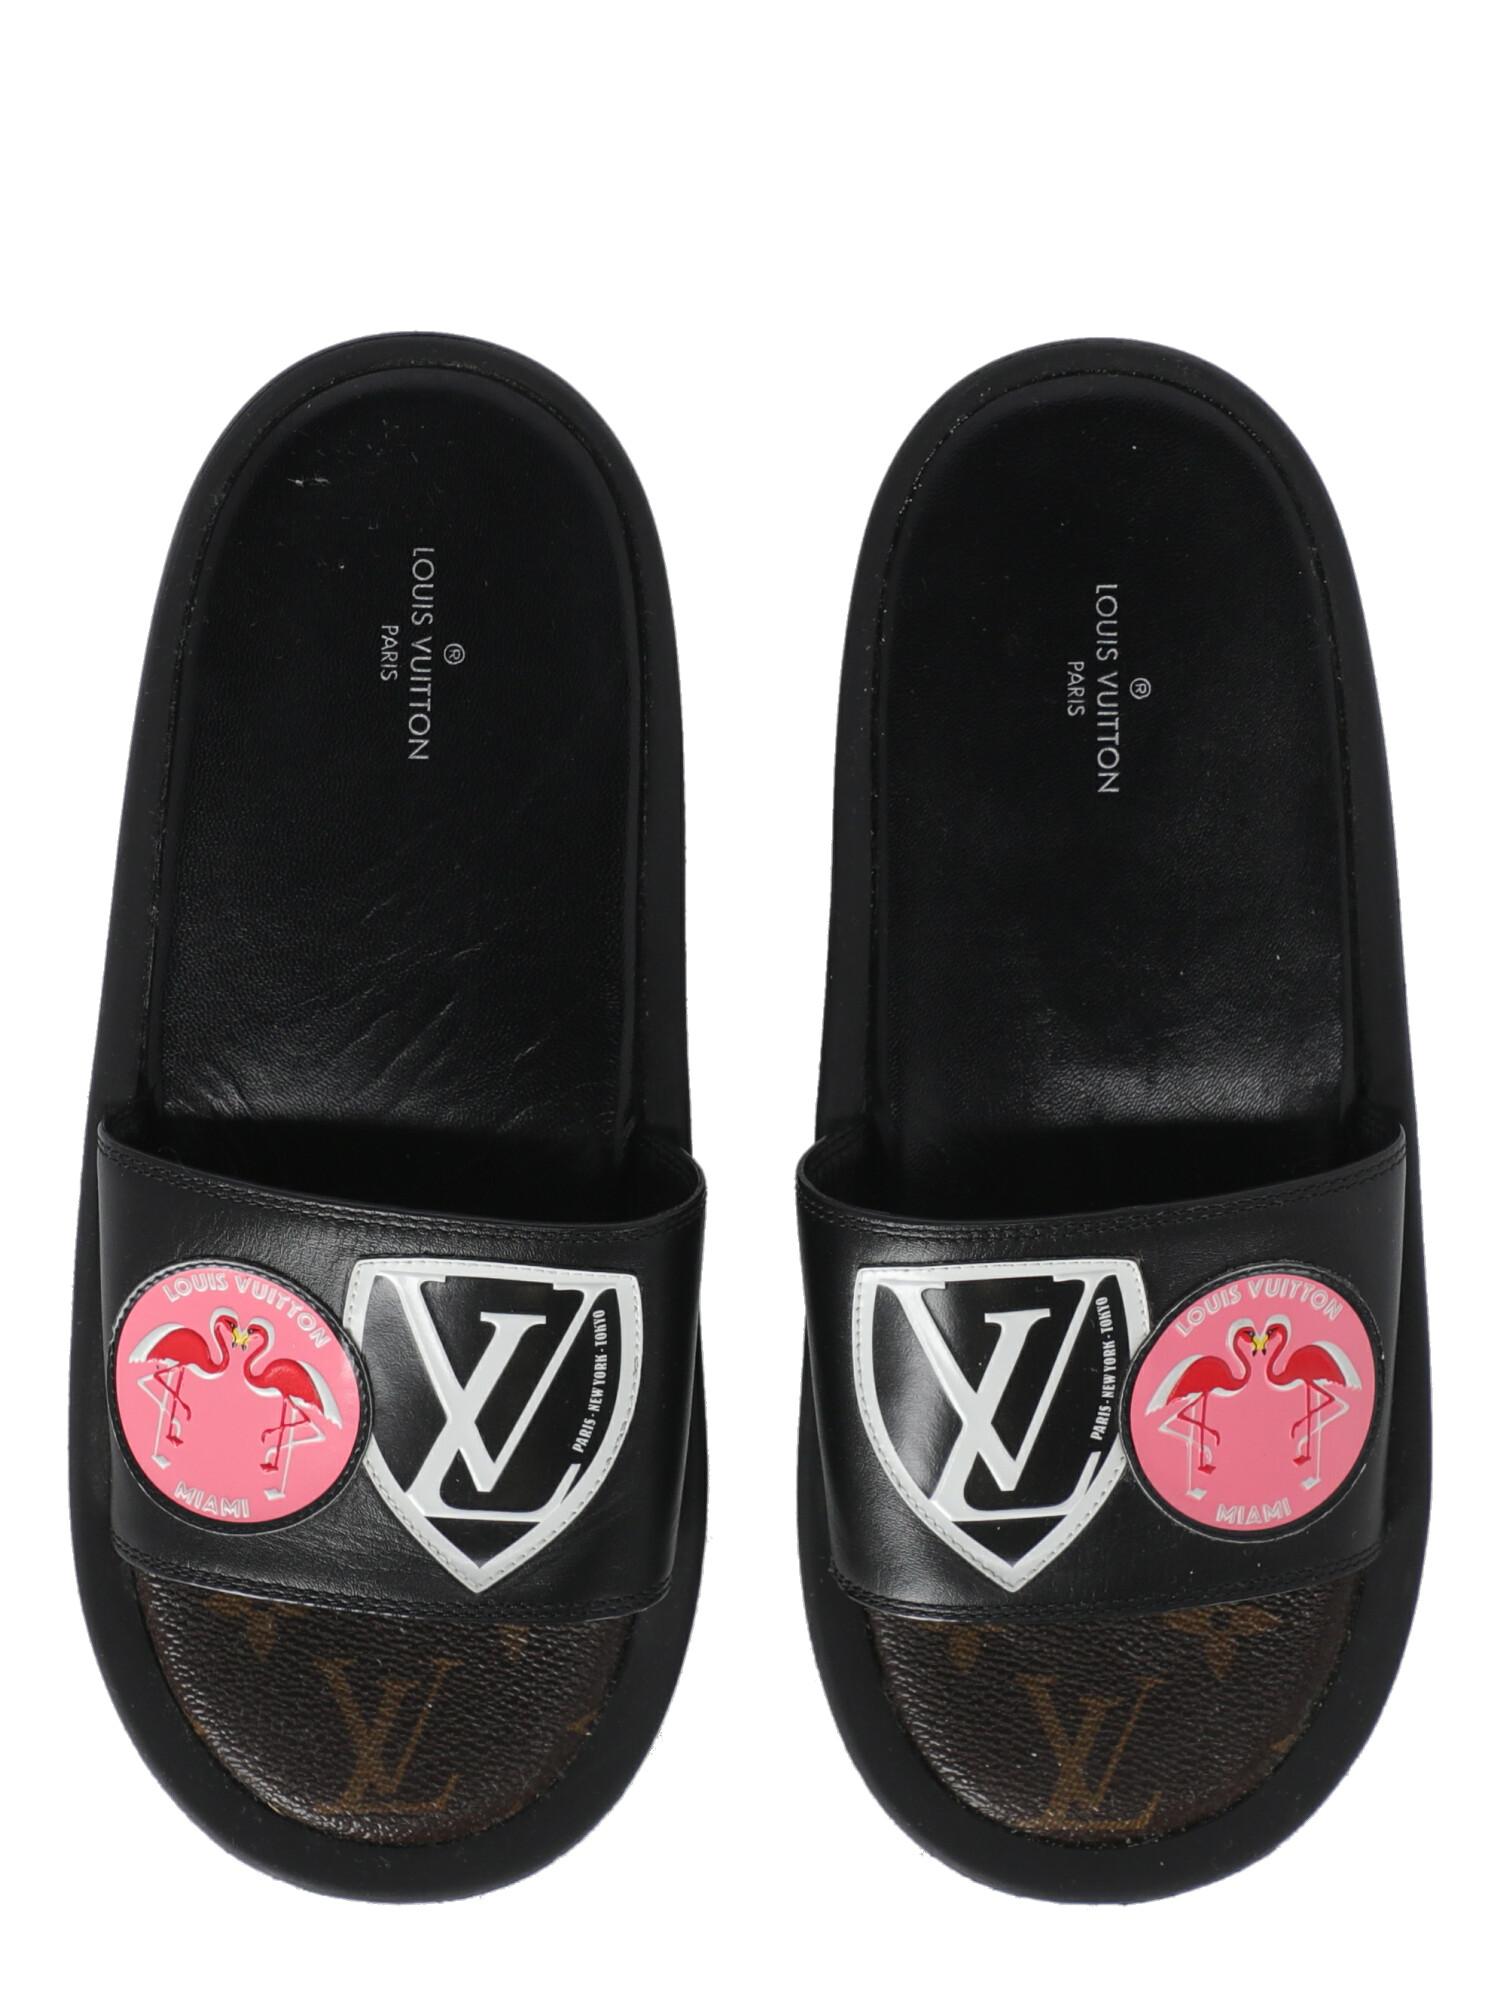 lv pink slippers